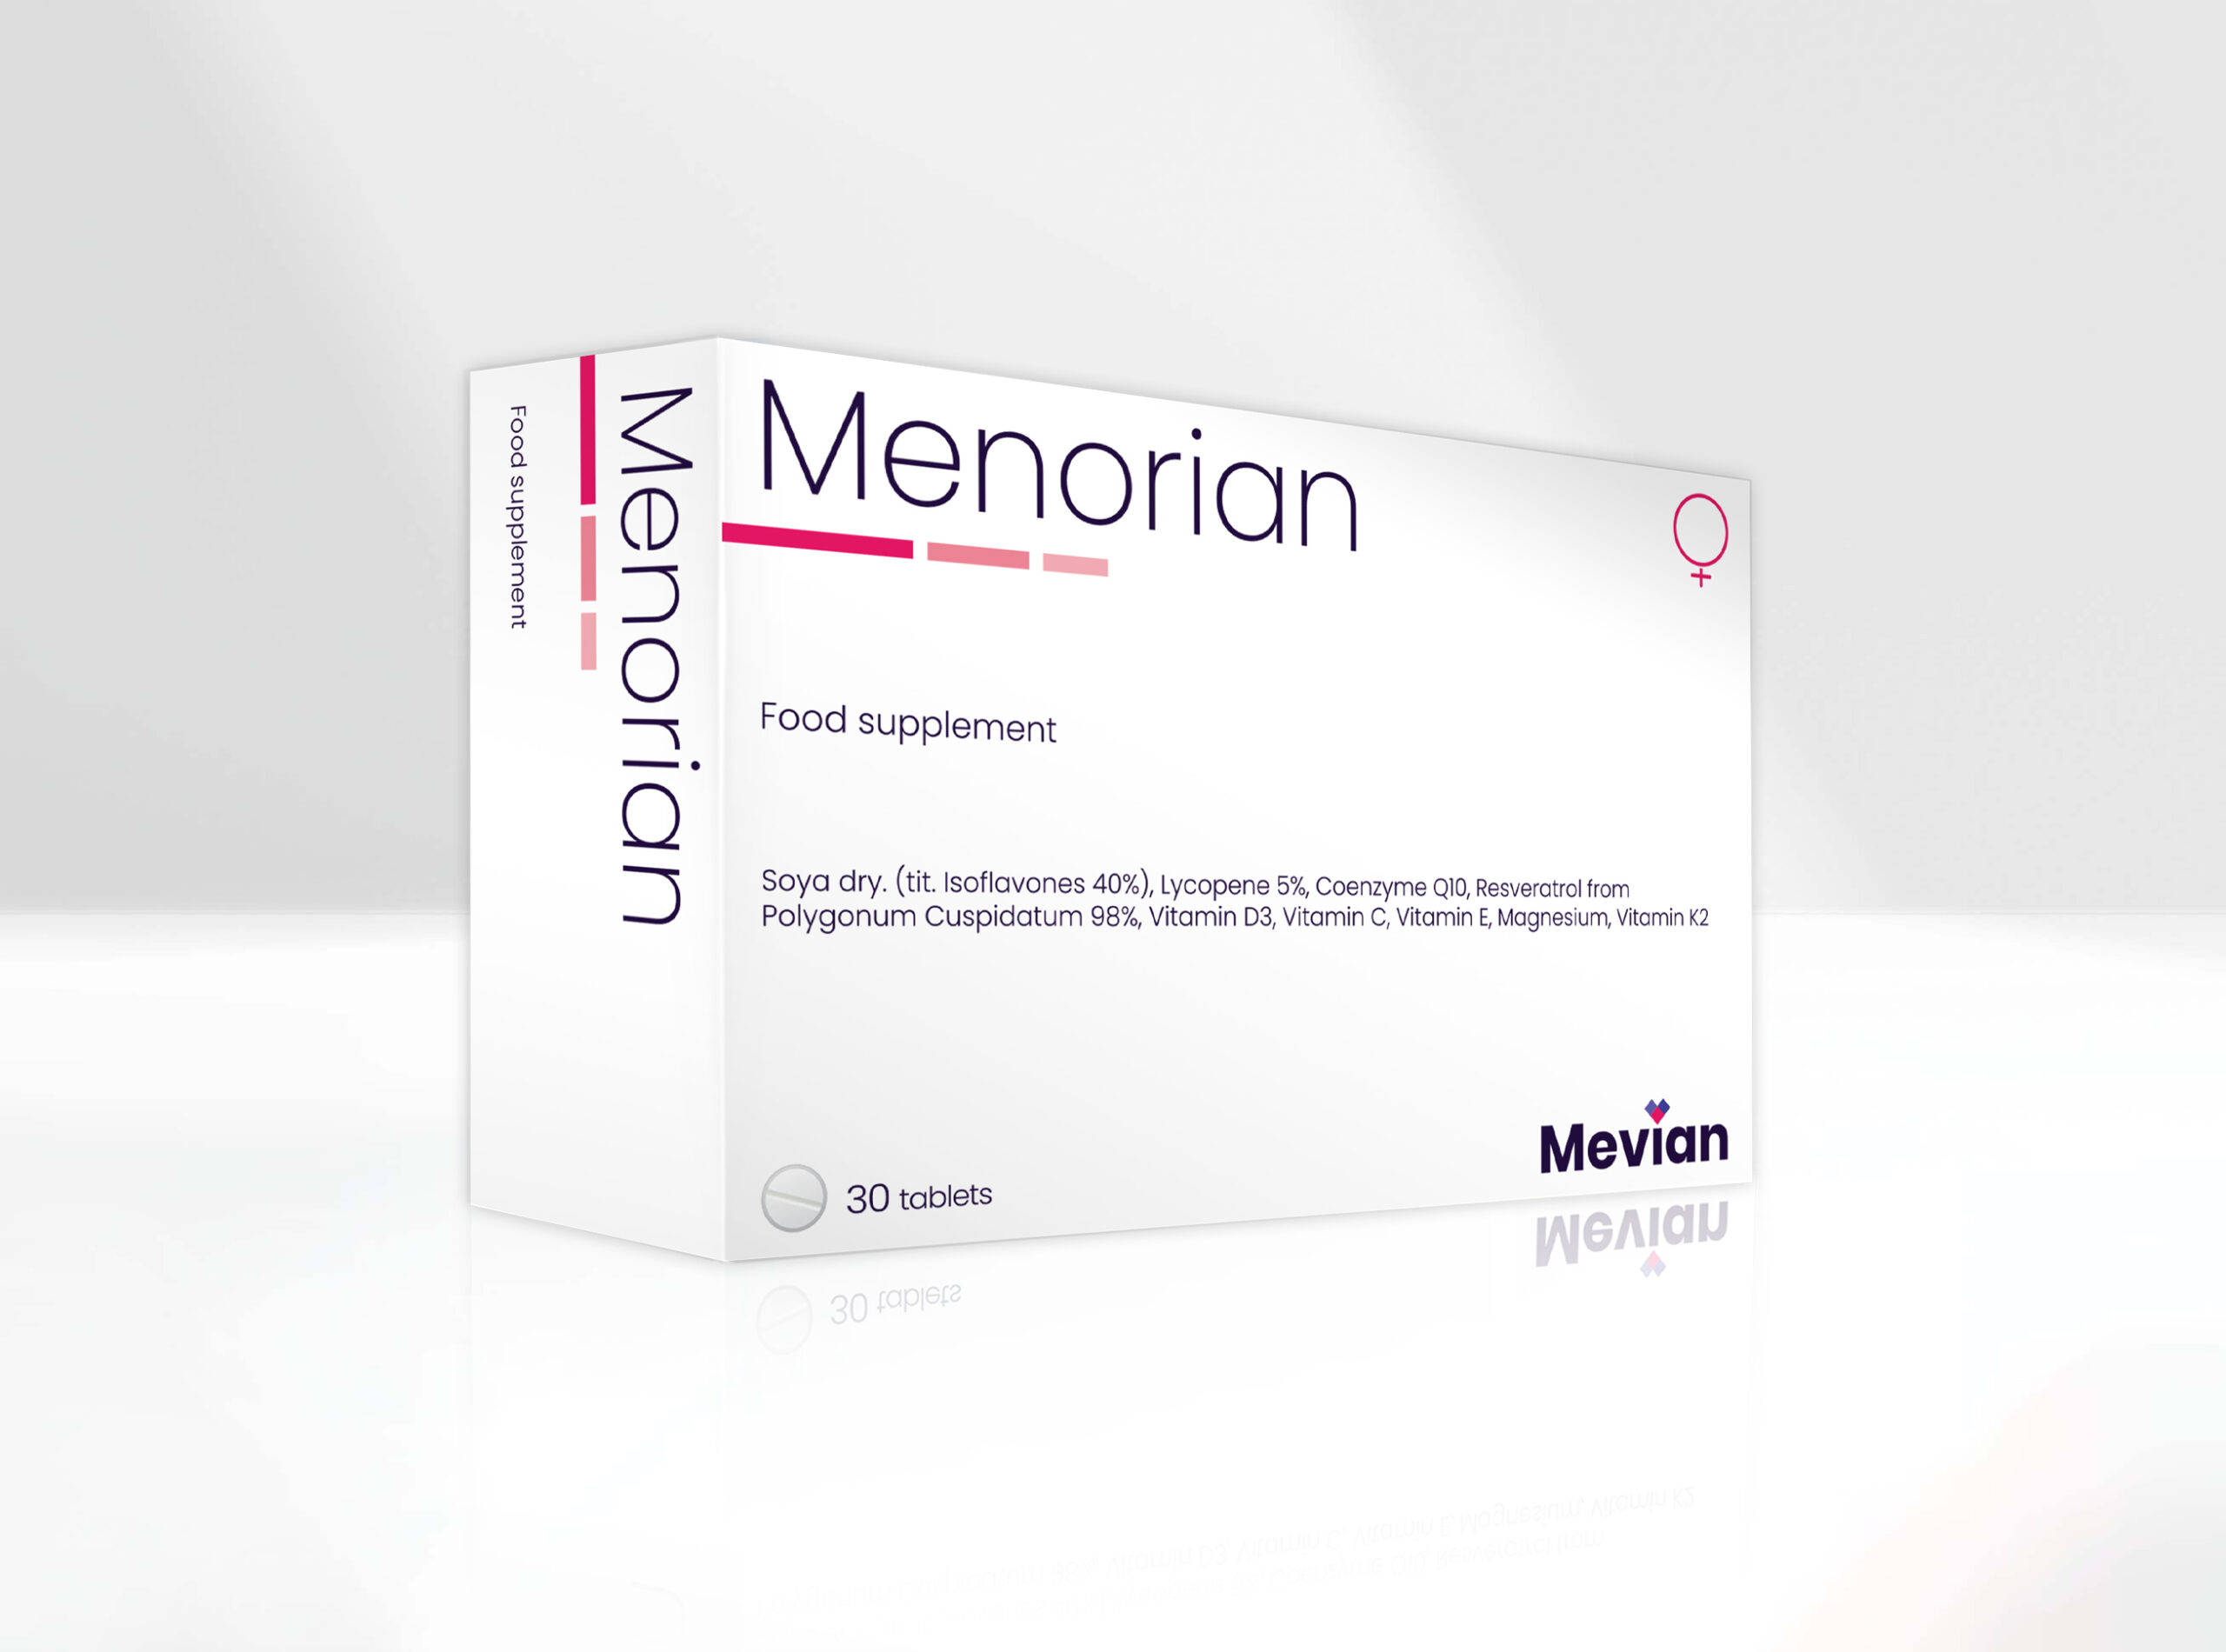 Menorian is a natural solution that counteracts menopausal disorders (hot flashes, mood disorders), and supports lipid metabolism, with additional health benefits.